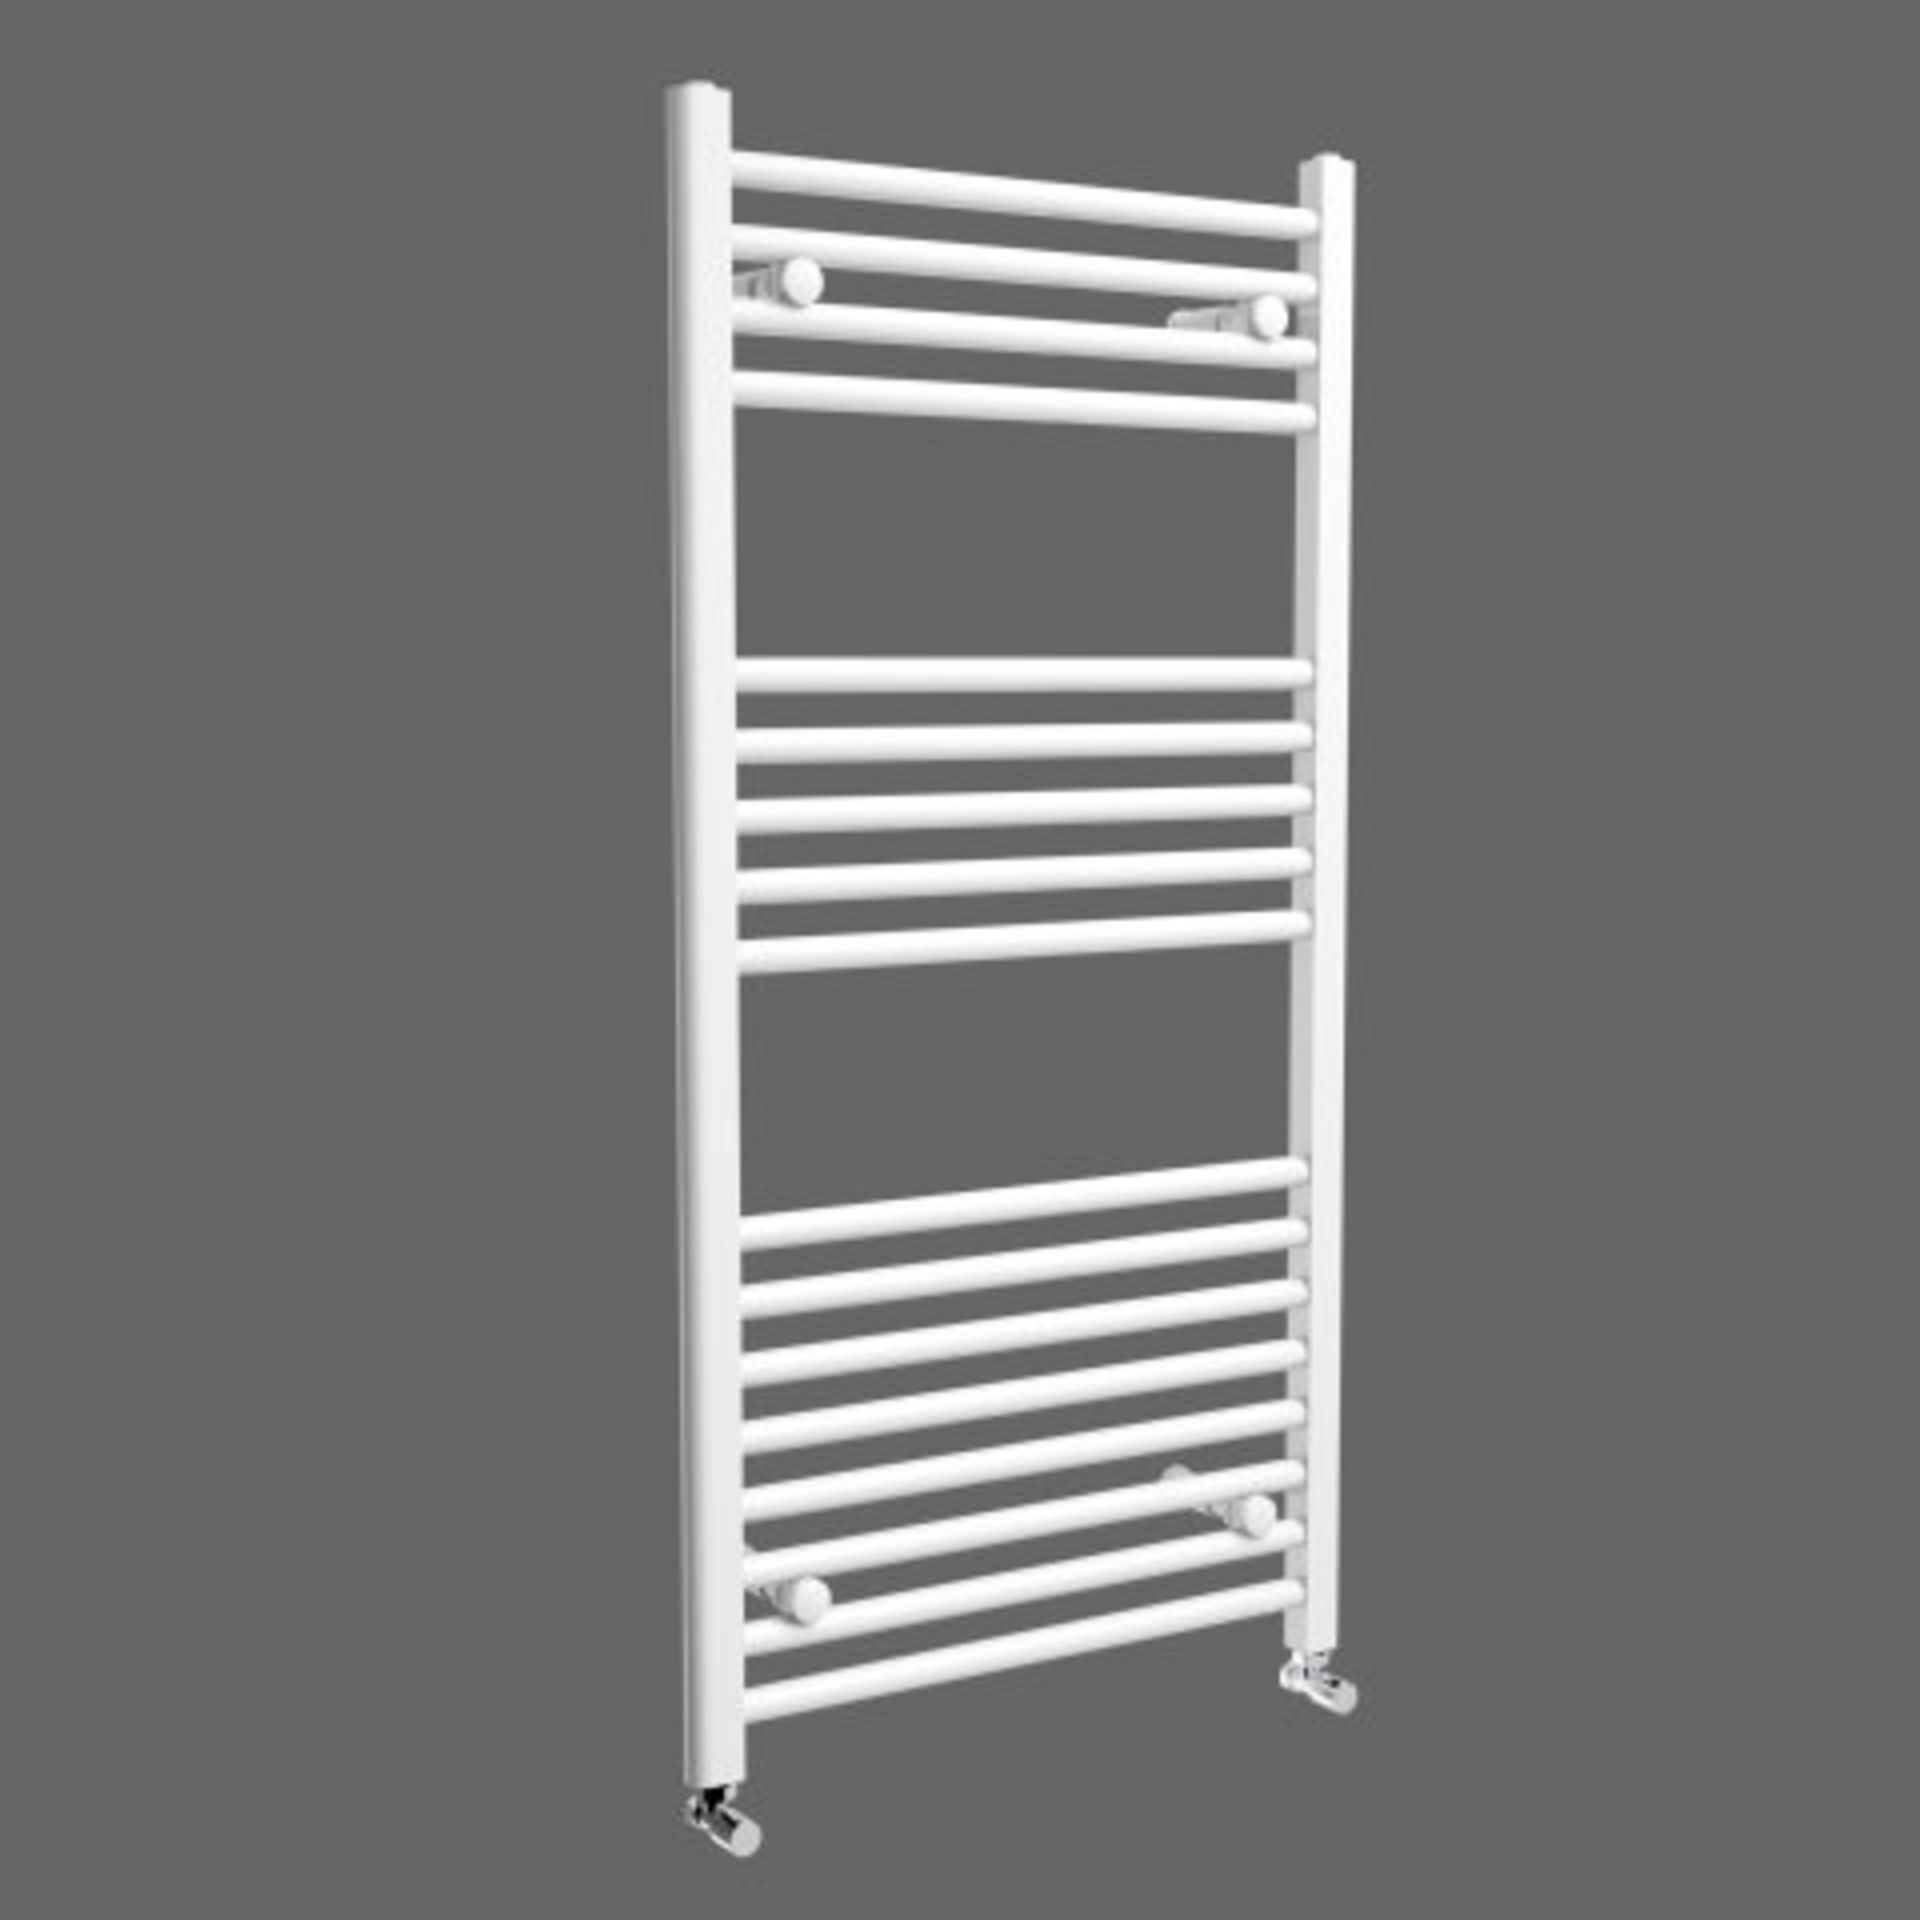 (W365) 1200x600mm White Straight Rail Ladder Towel Radiator Offering durability and style, our Polar - Image 3 of 3